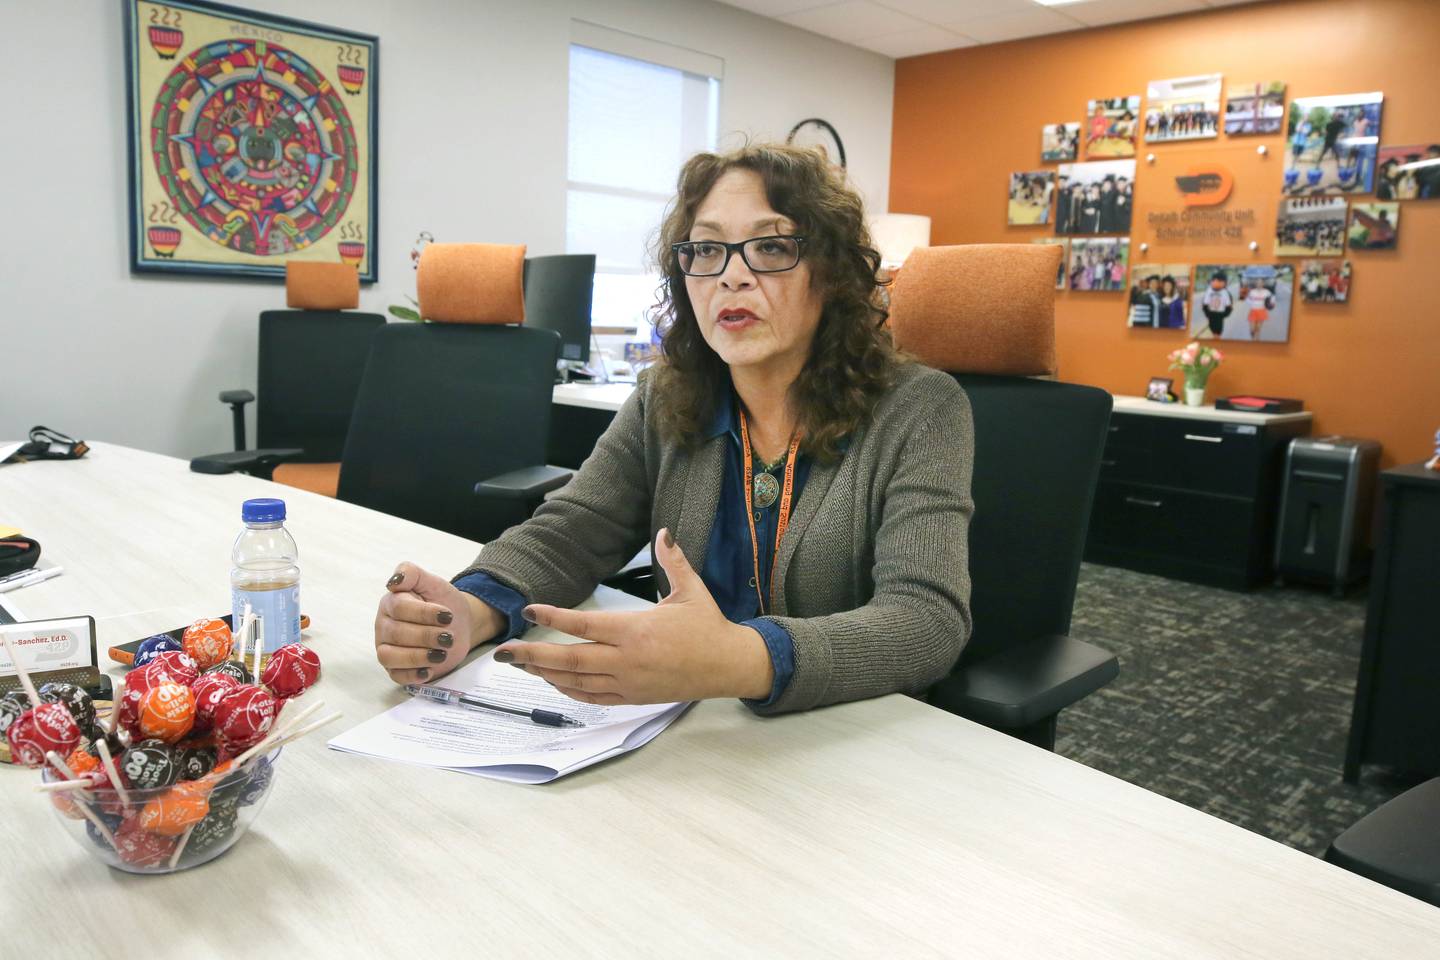 DeKalb School District 428 Superintendent Minerva Garcia-Sanchez discusses the results of the 2023 Illinois State Board of Education report card Wednesday, Nov. 1, 2023, in her office in DeKalb.